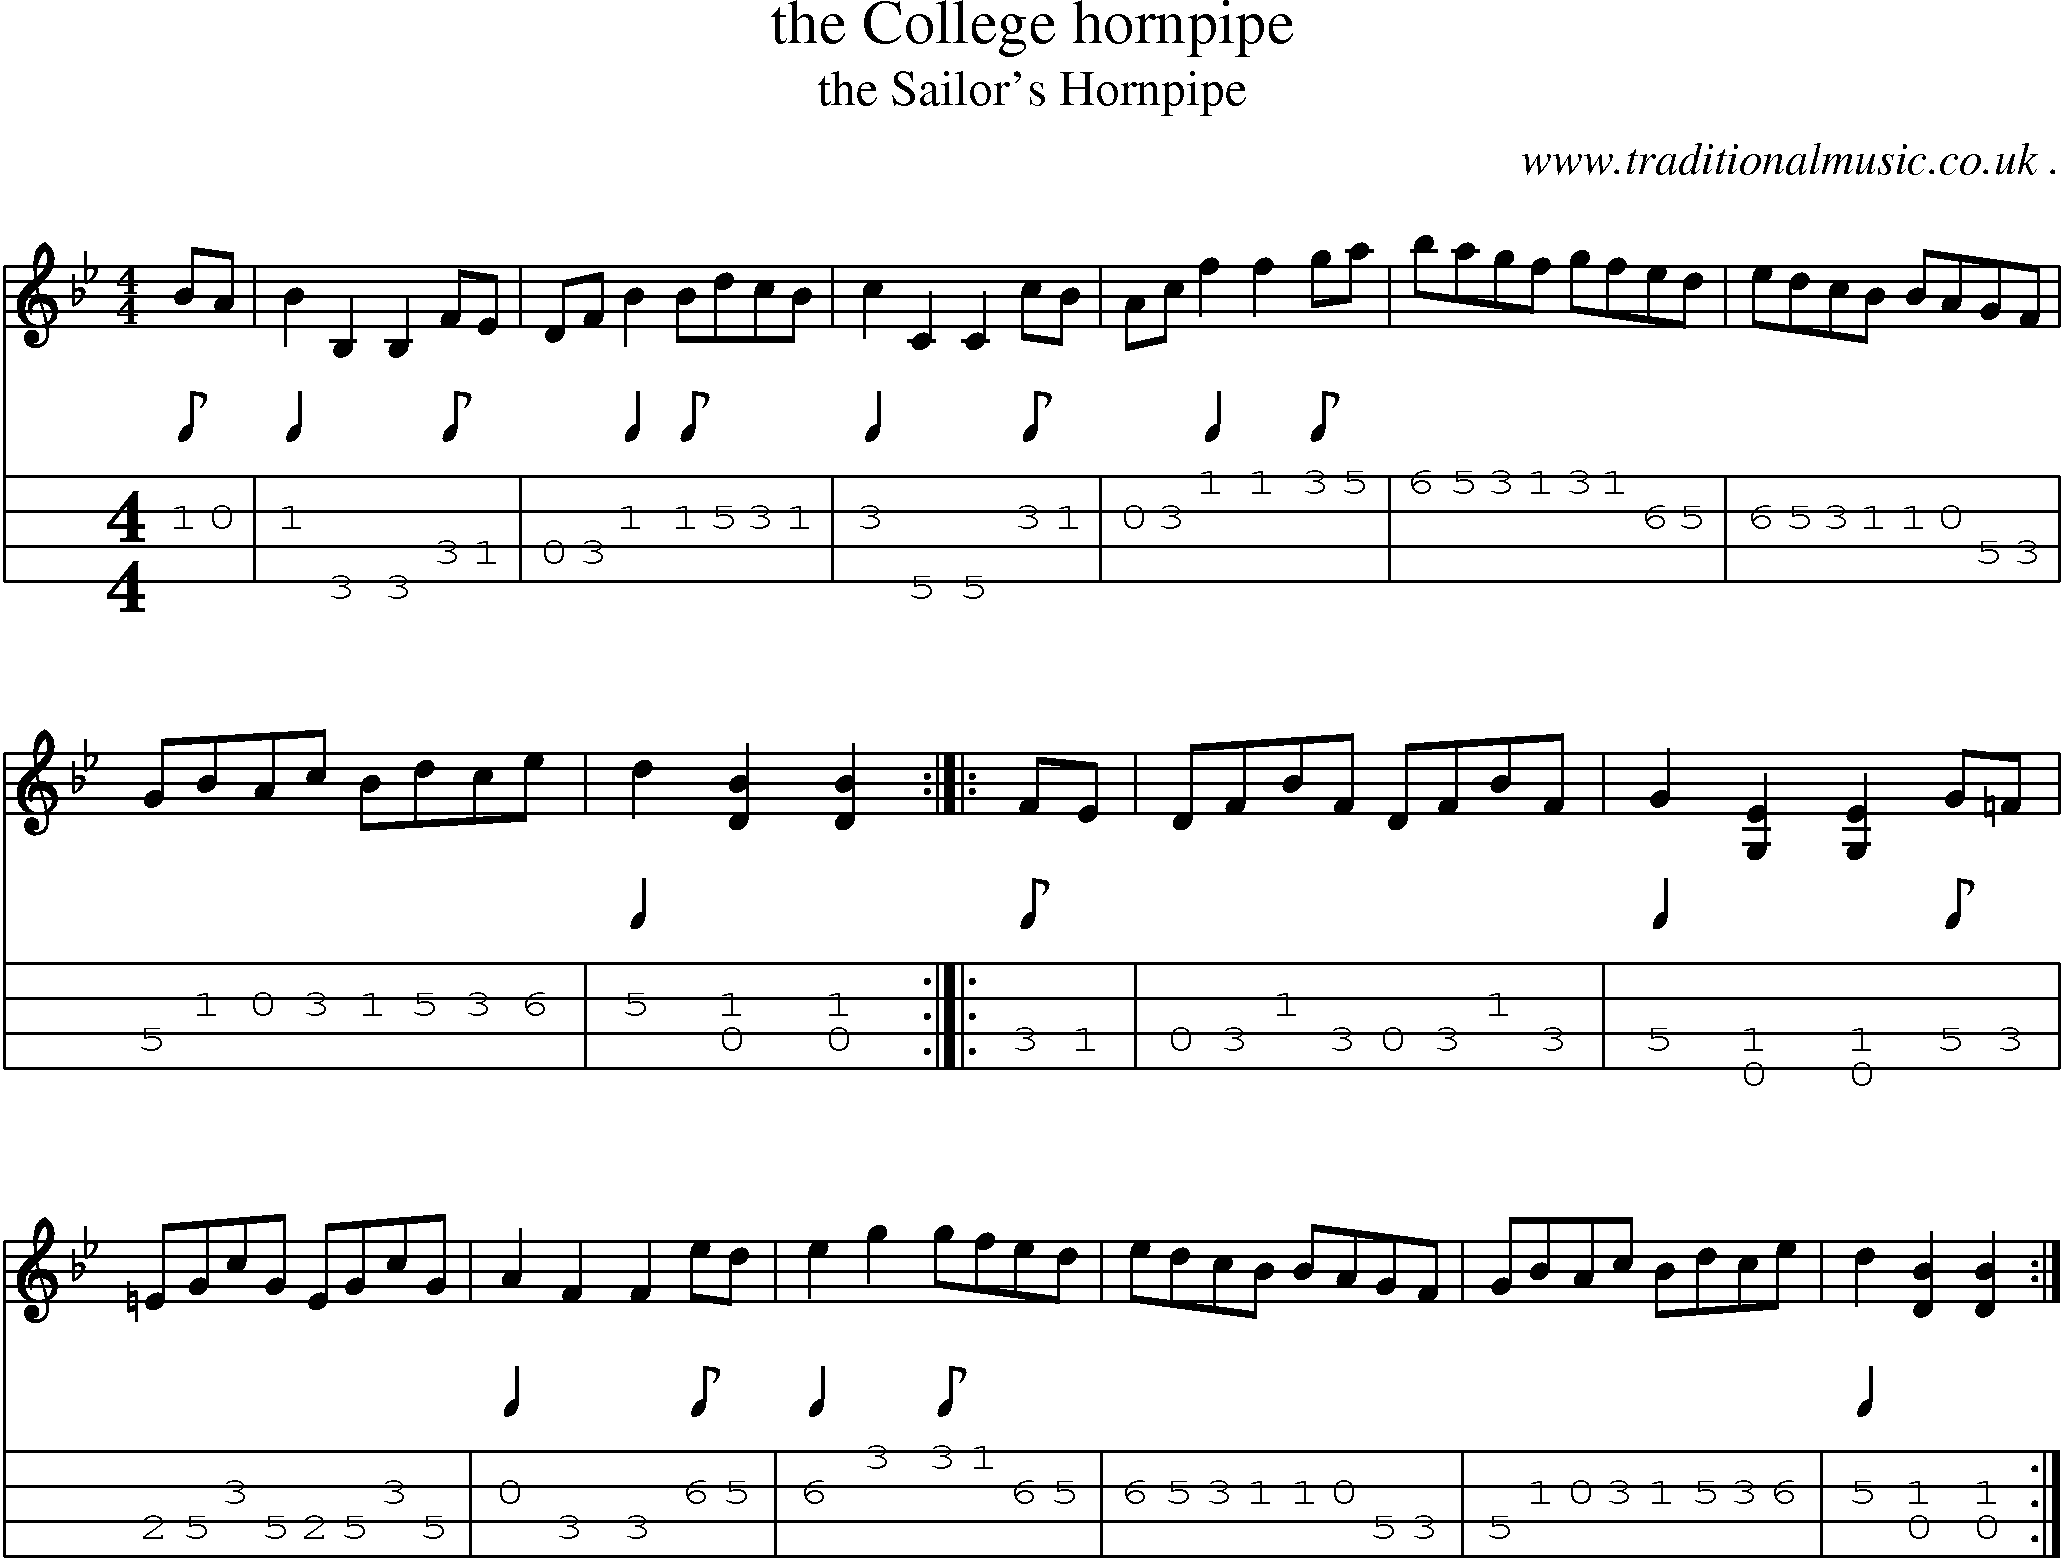 Sheet-Music and Mandolin Tabs for The College Hornpipe